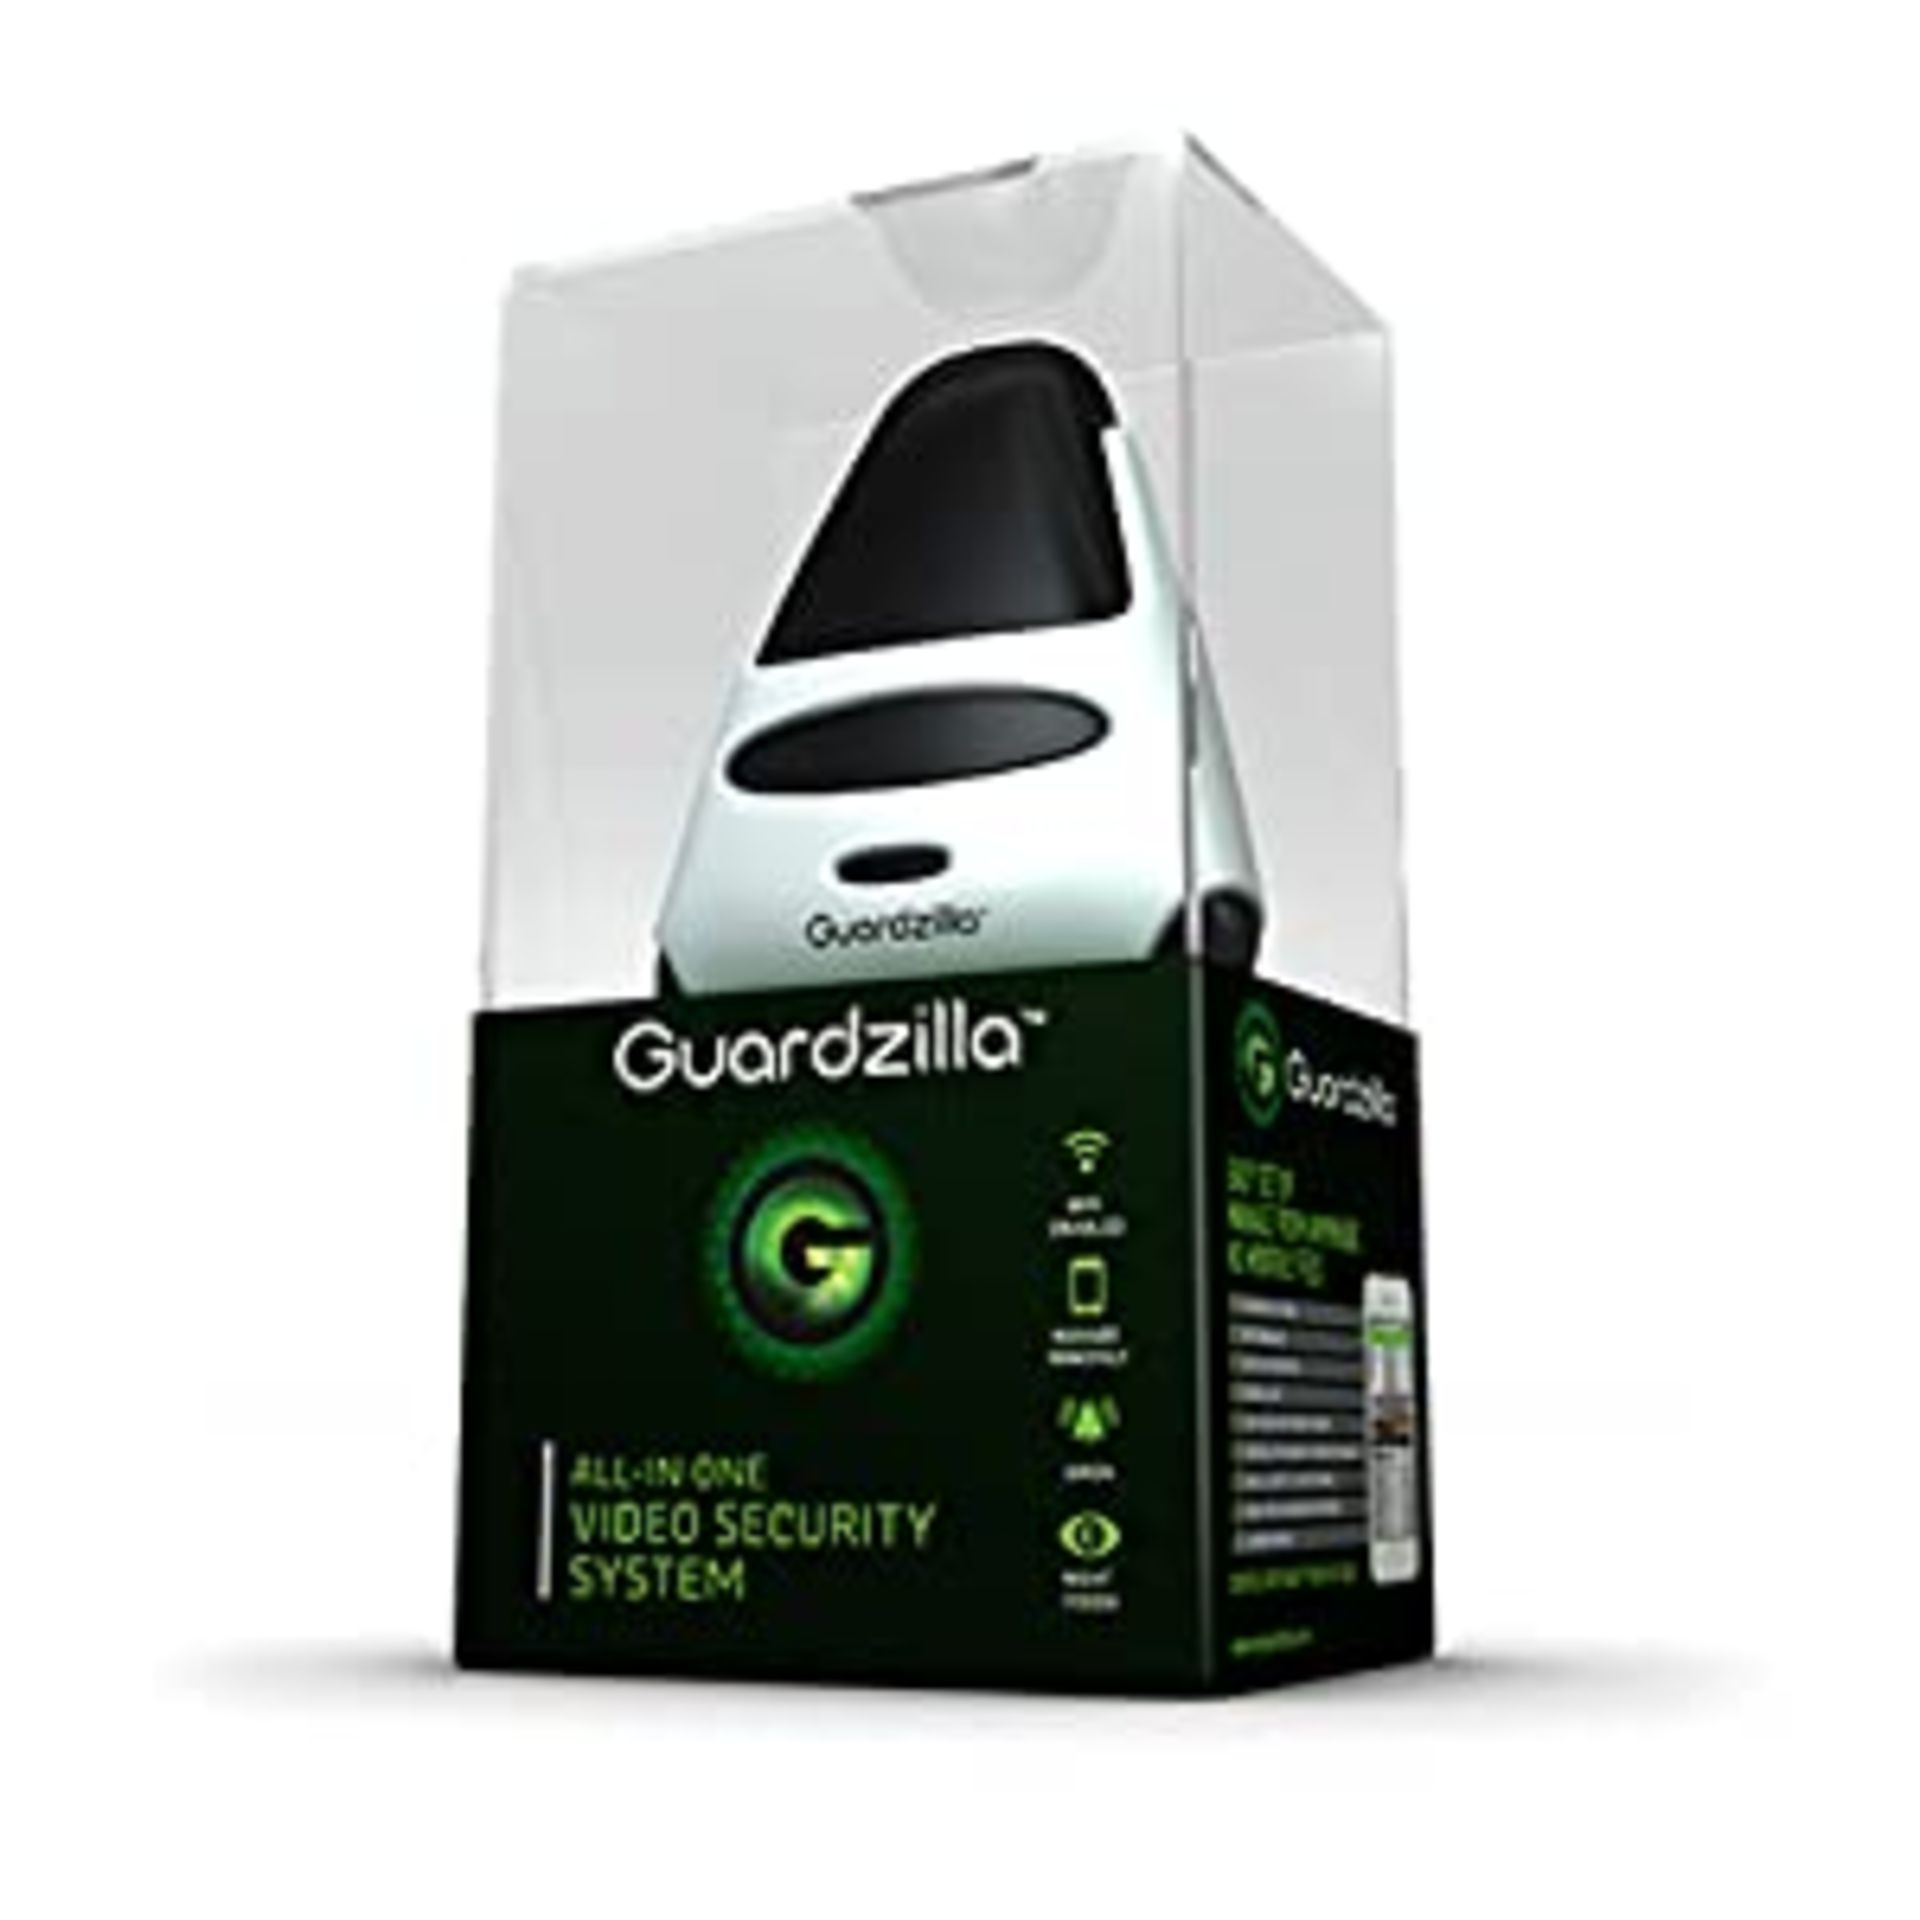 1 x Guardzilla All-In-One HD Security System Including Camera + Siren + Smartphone Remote Capability - Image 4 of 4